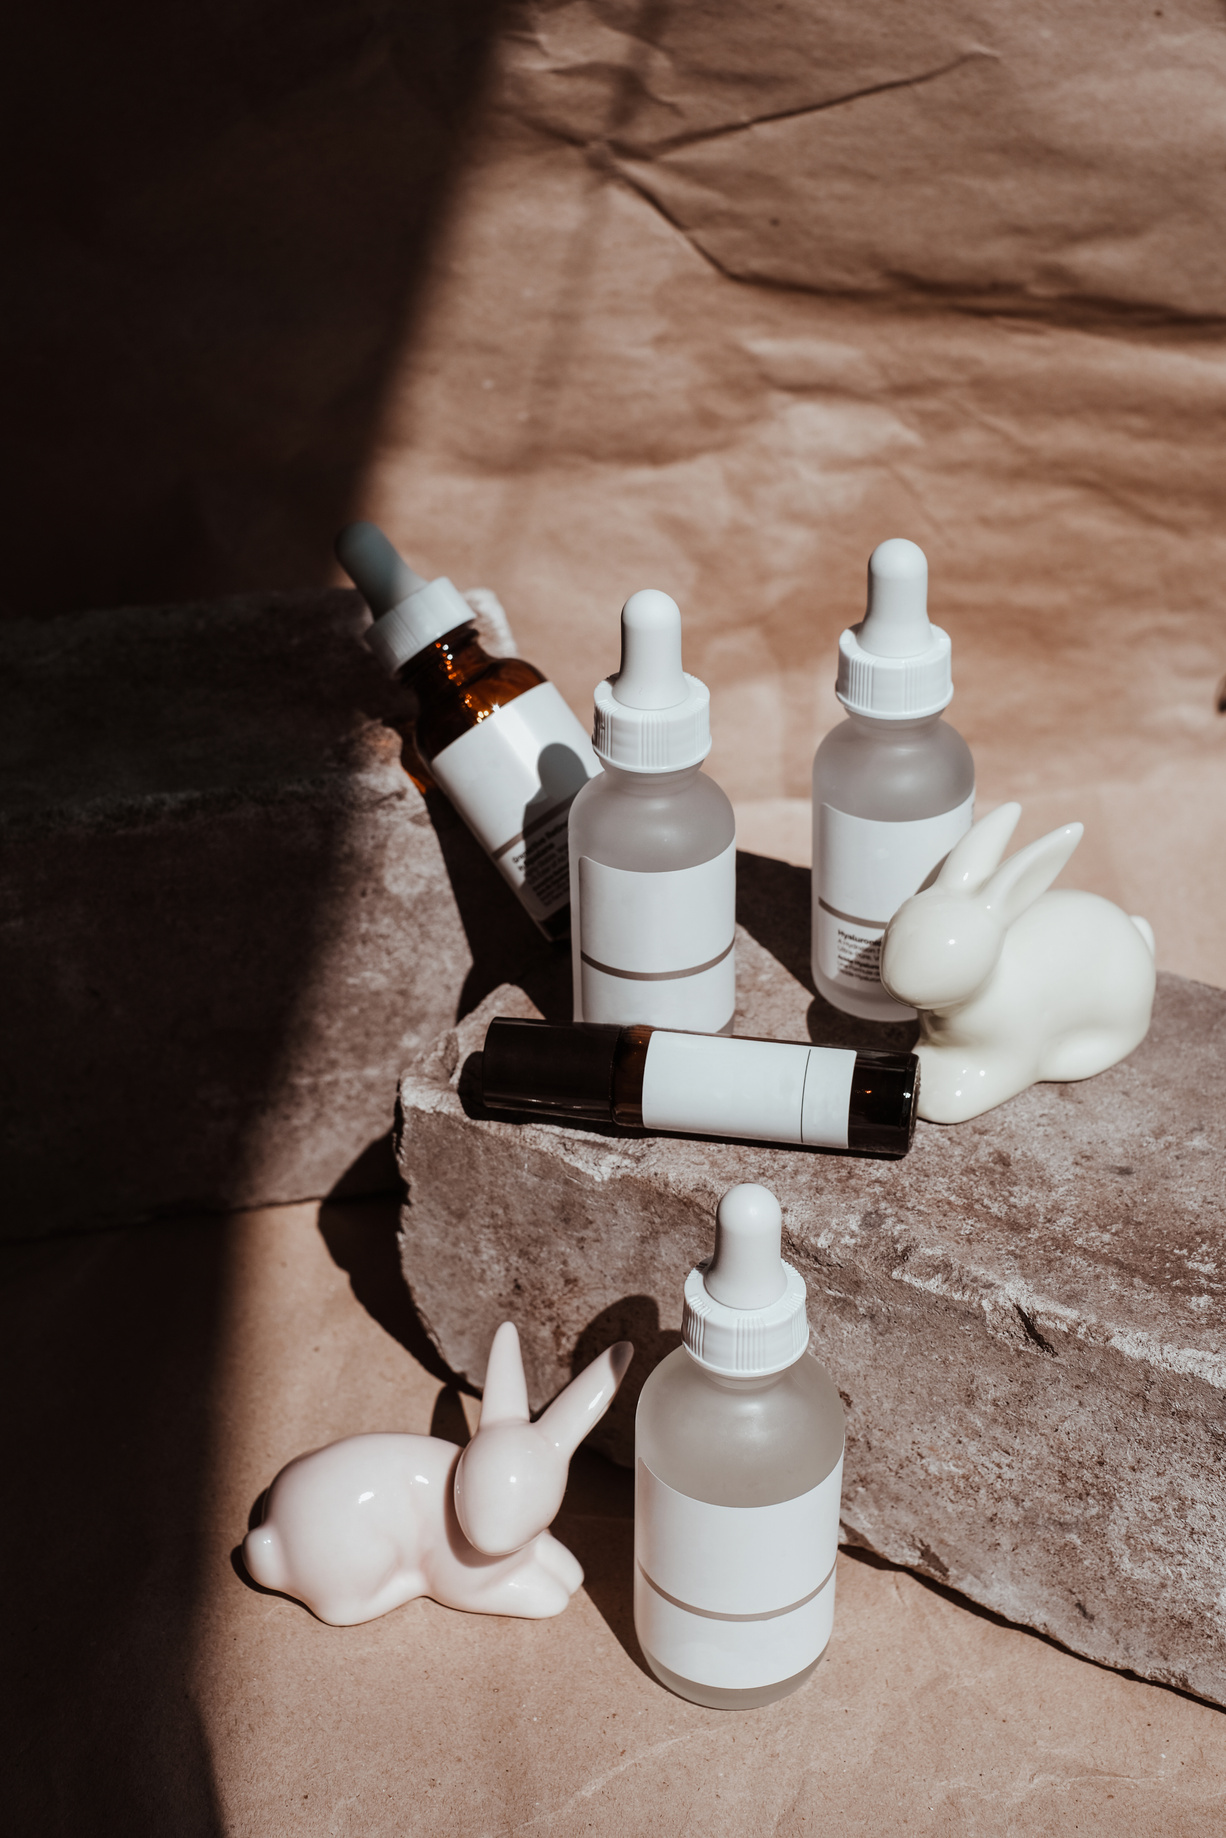 Bottles of Cosmetic Products on Rock with White Ceramic Rabbits